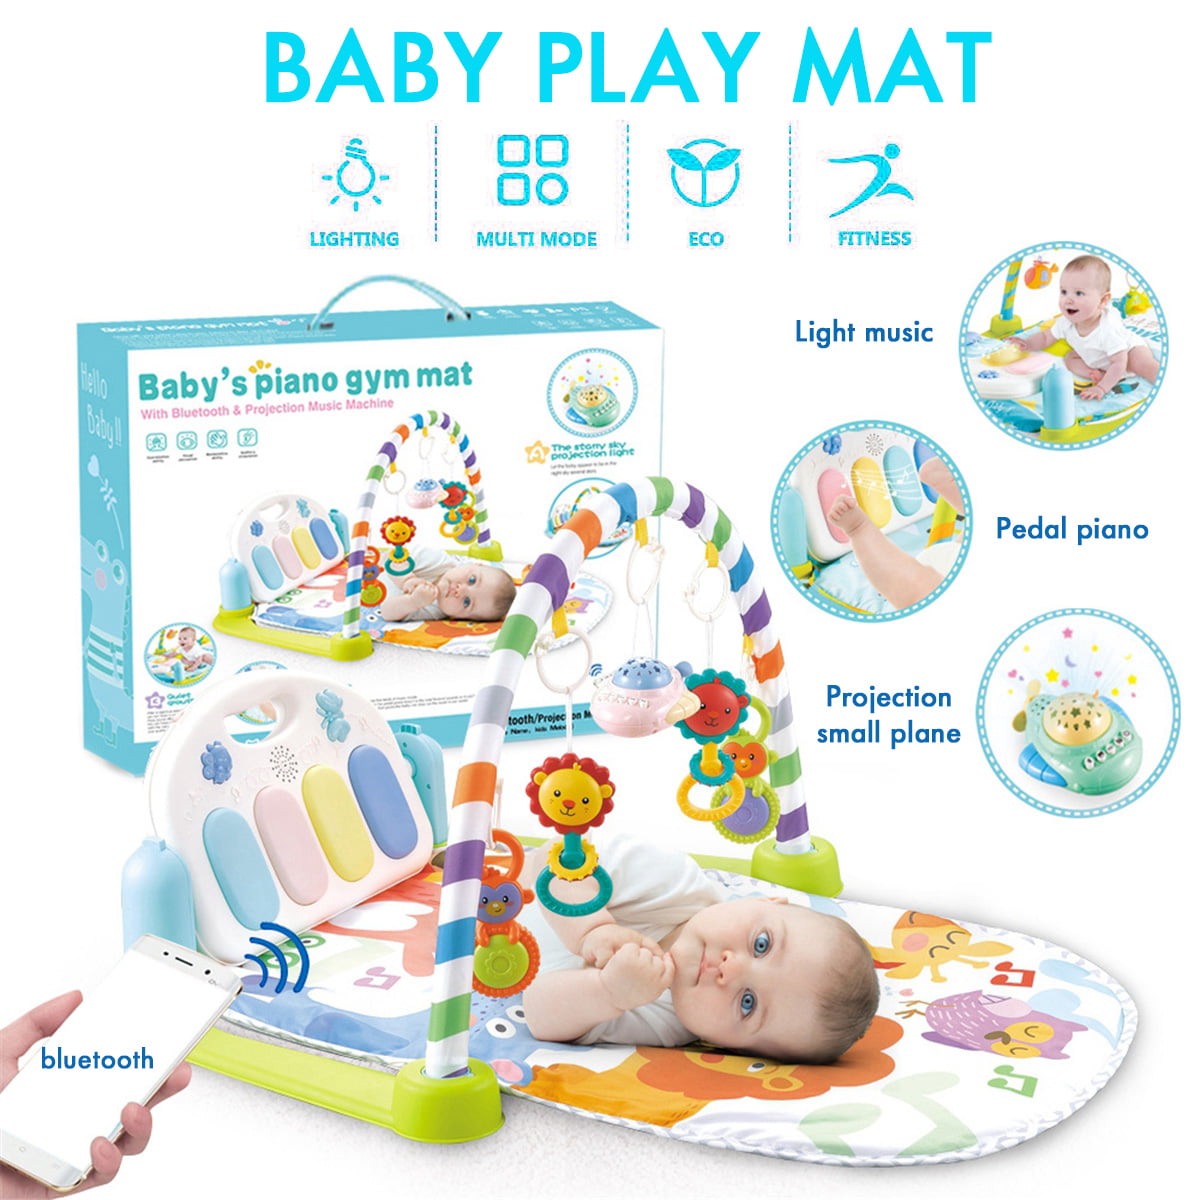 Newborn aniceday Baby Play Mat With Piano Fun Kick And Play Piano Gym Comfortable Baby Gyms And Activity Play Mat Soft Activity Gym Toys For Infants Girls And Boys Age 0+ 